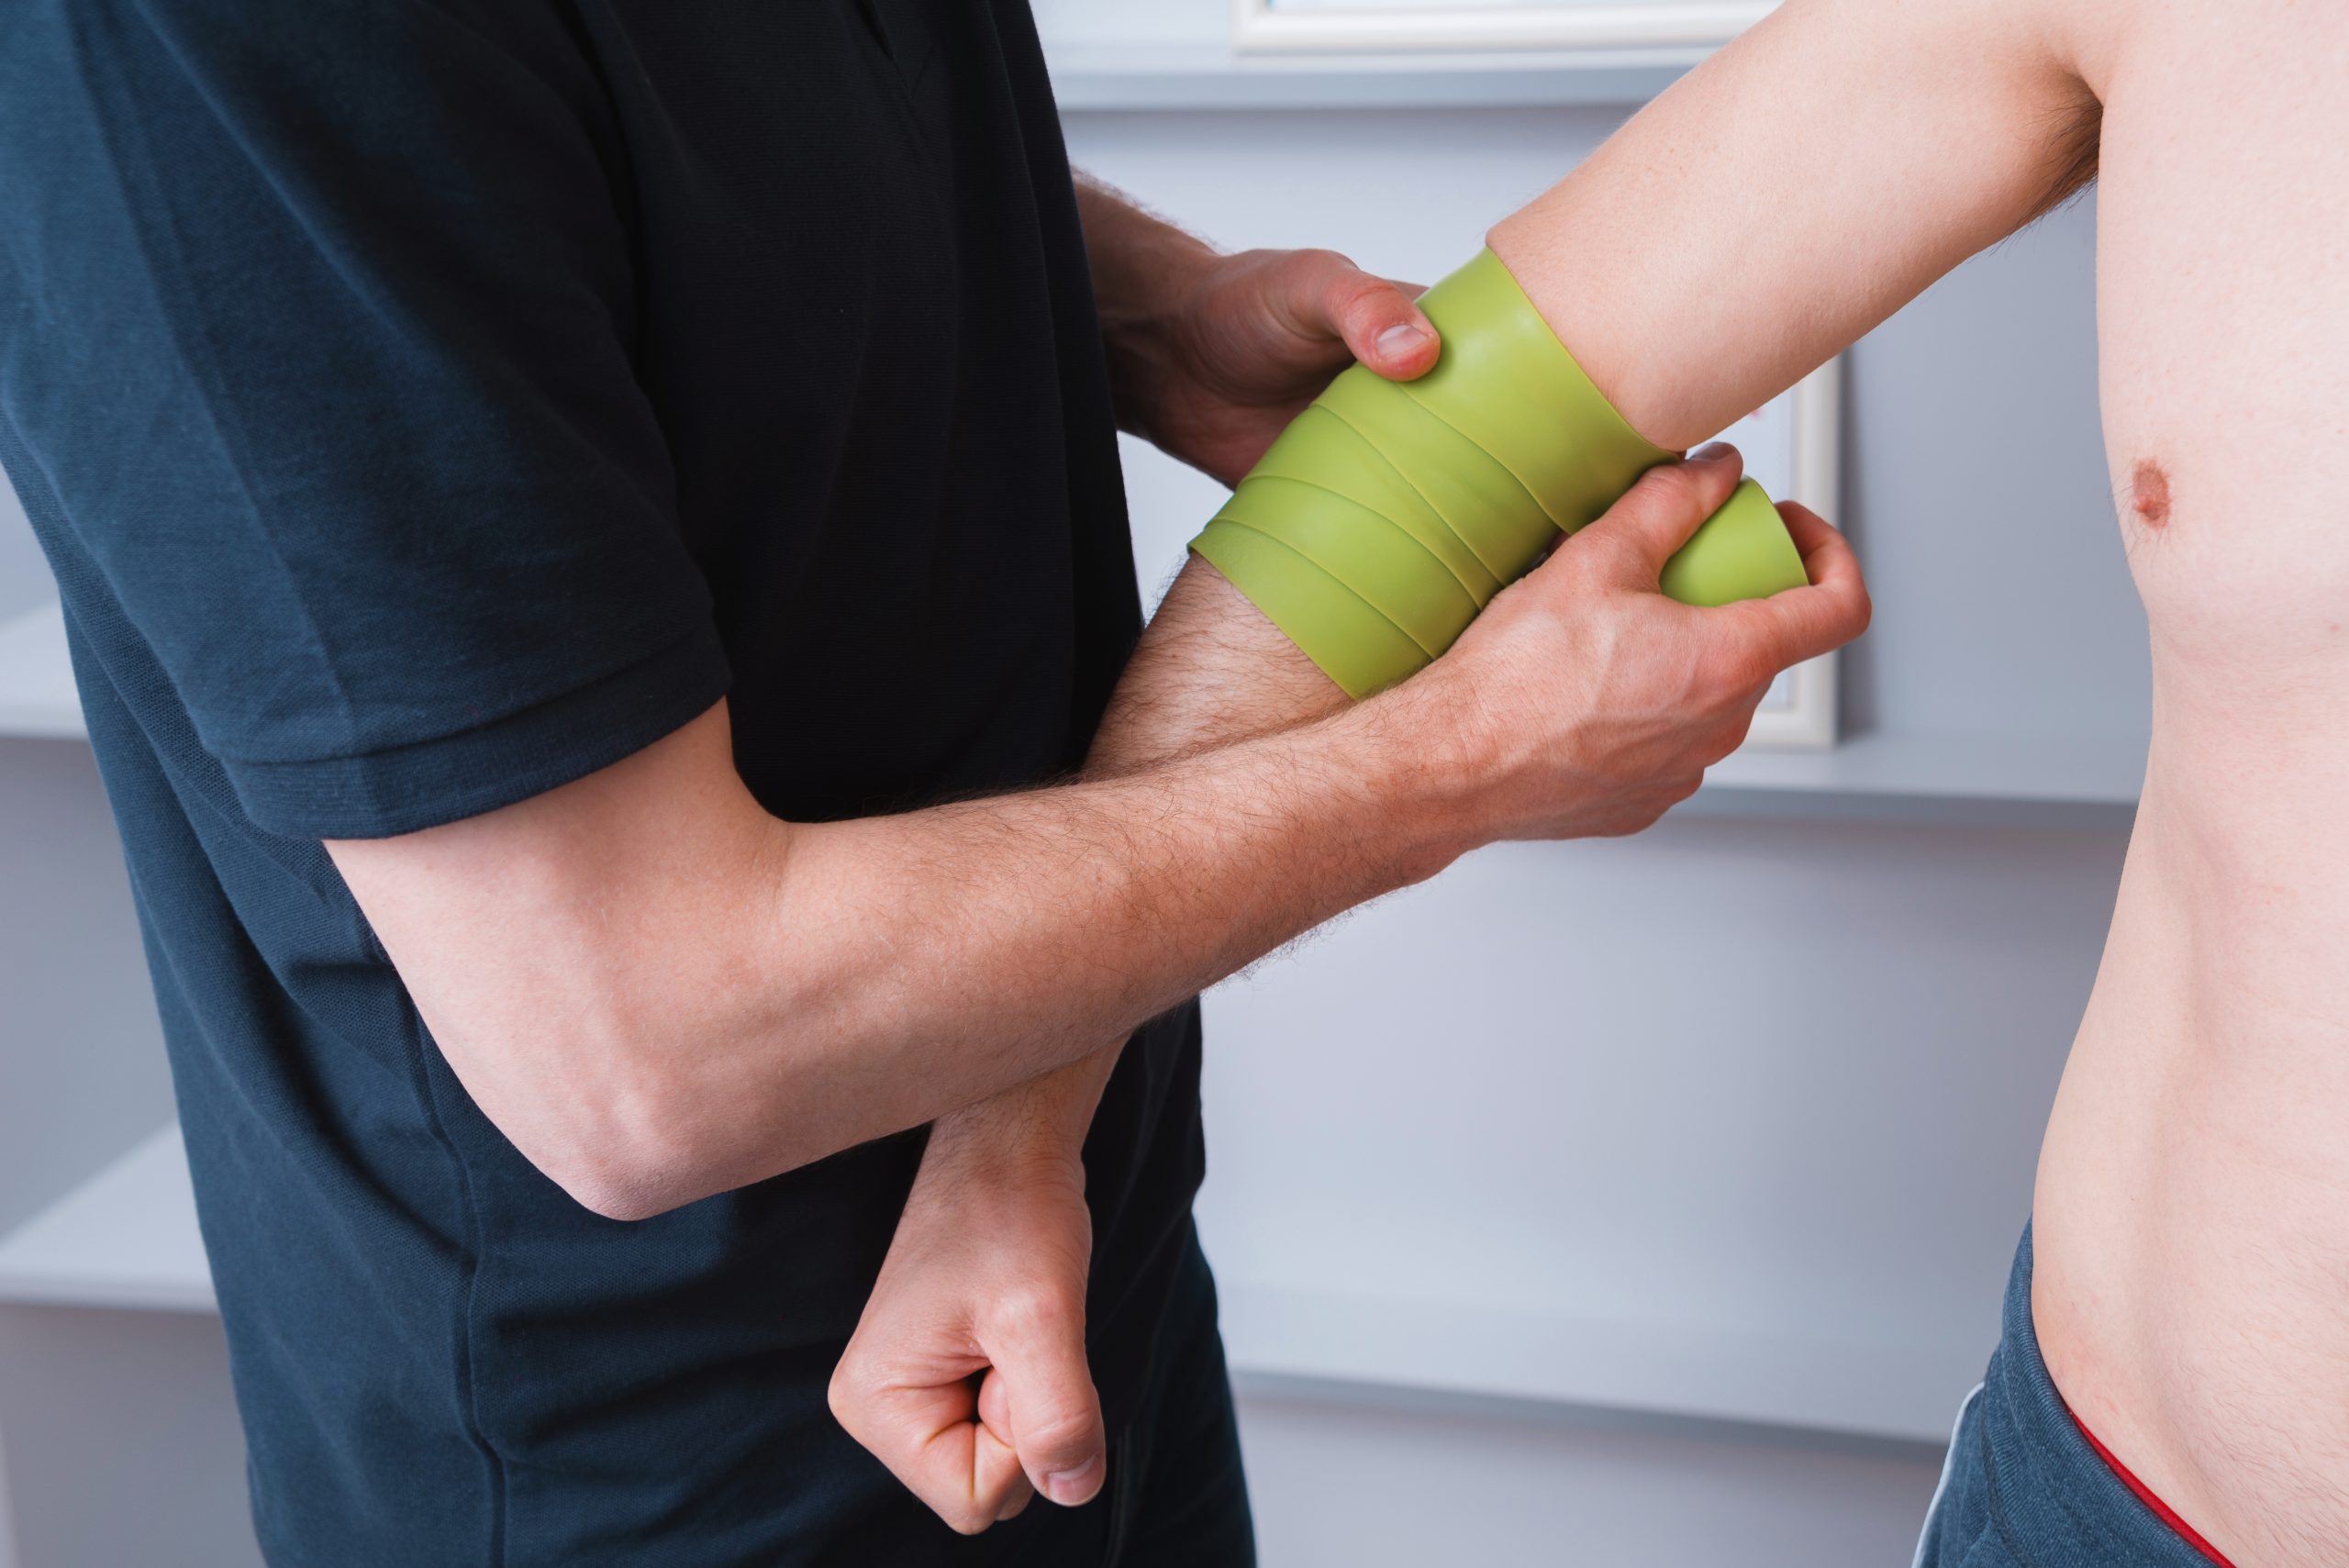 Kinesiology taping.Physical therapist applying kinesiology tape to patient elbow.